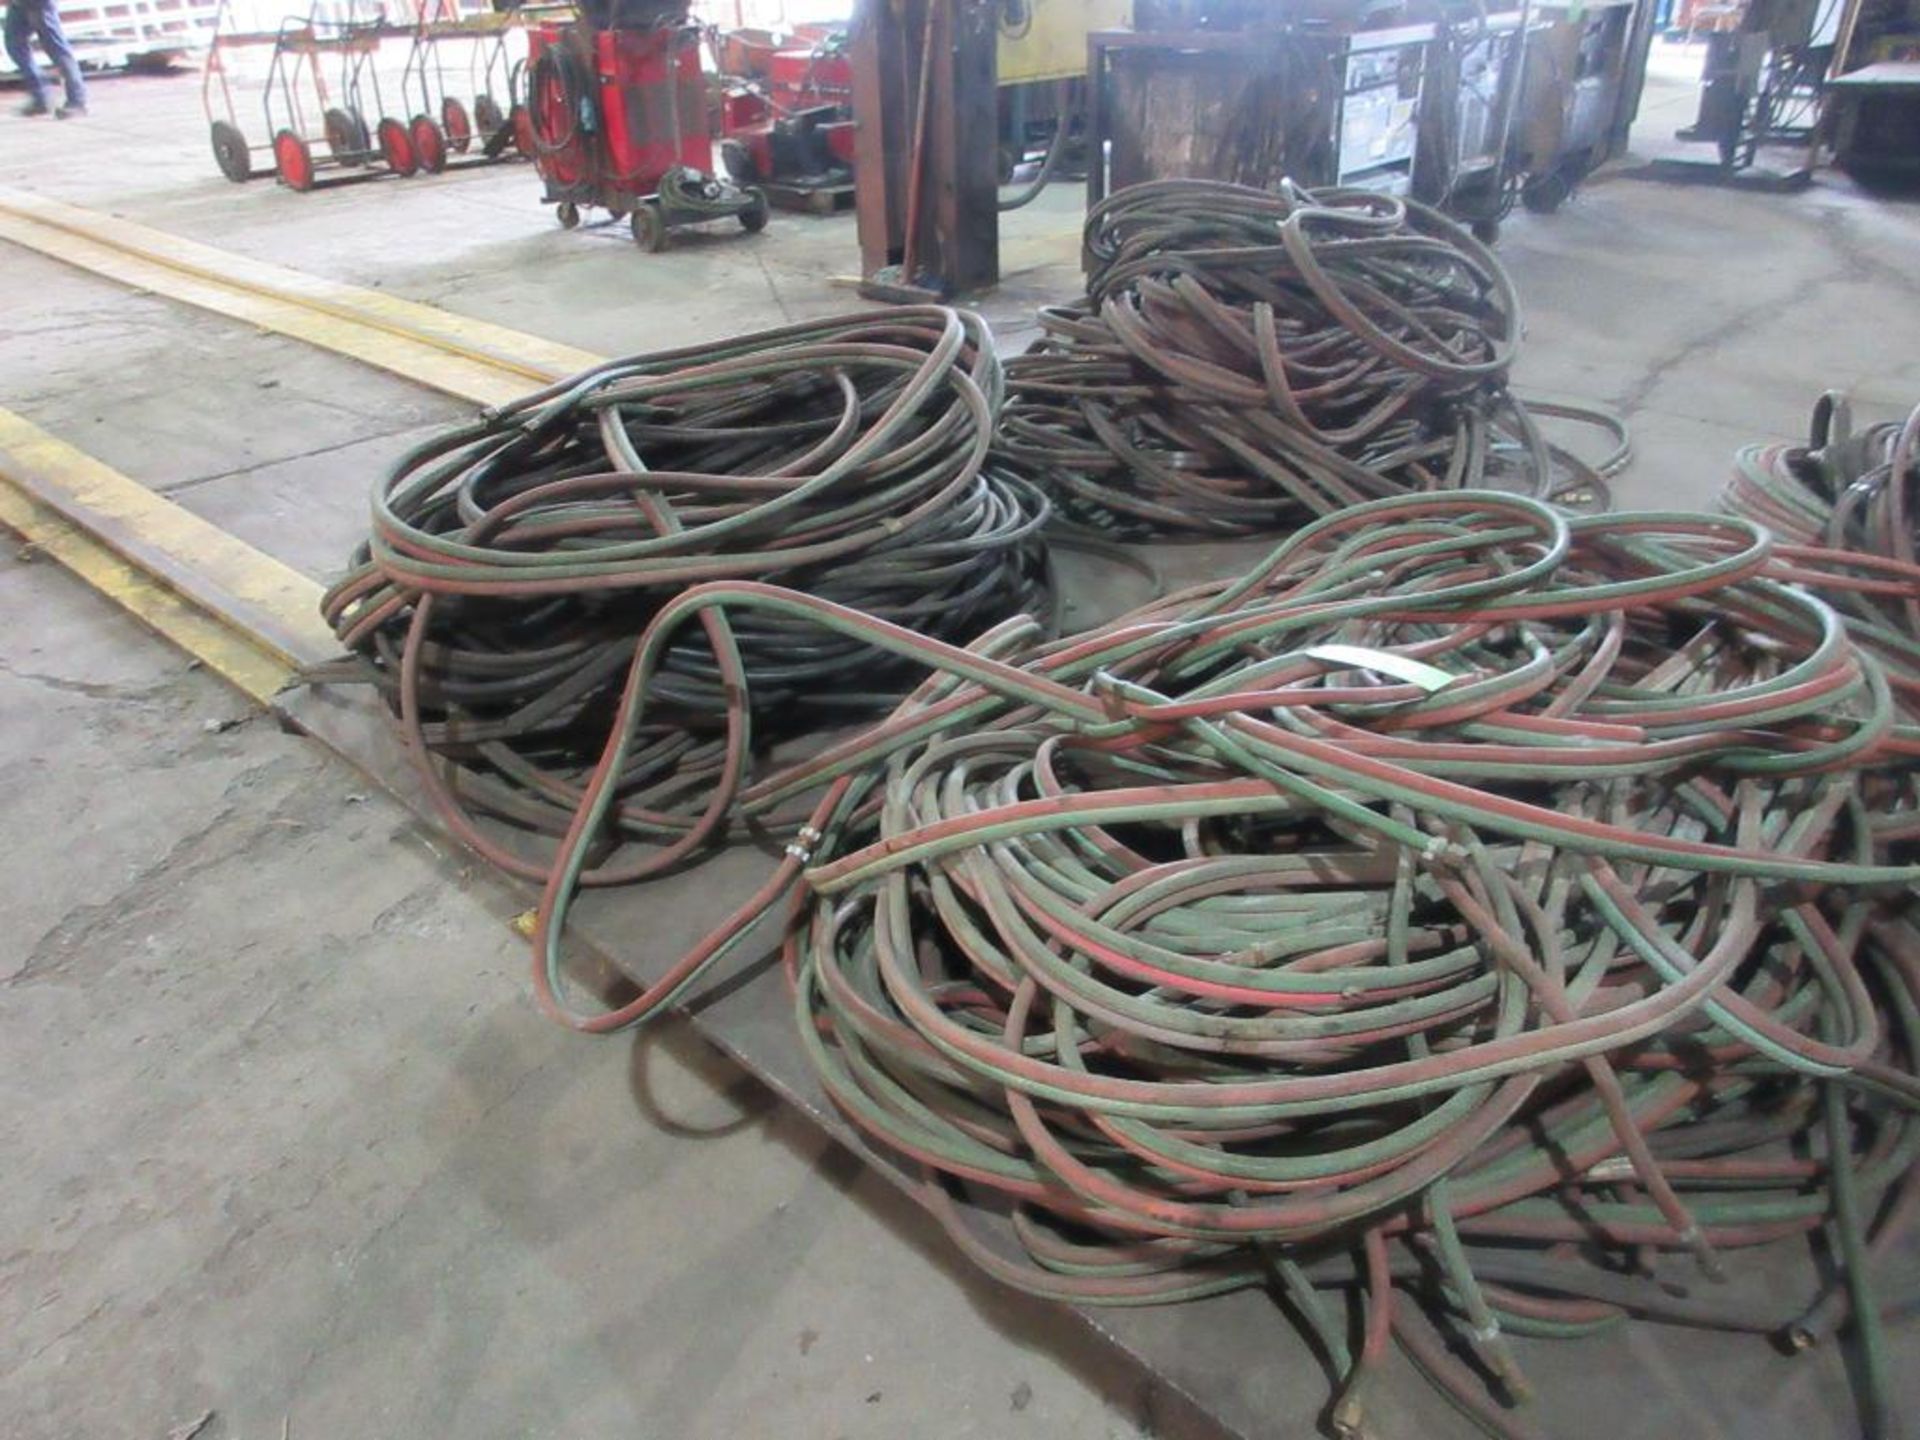 LOT OF 3 PILES OF WELDING GAS HOSES (EAST PLANT)